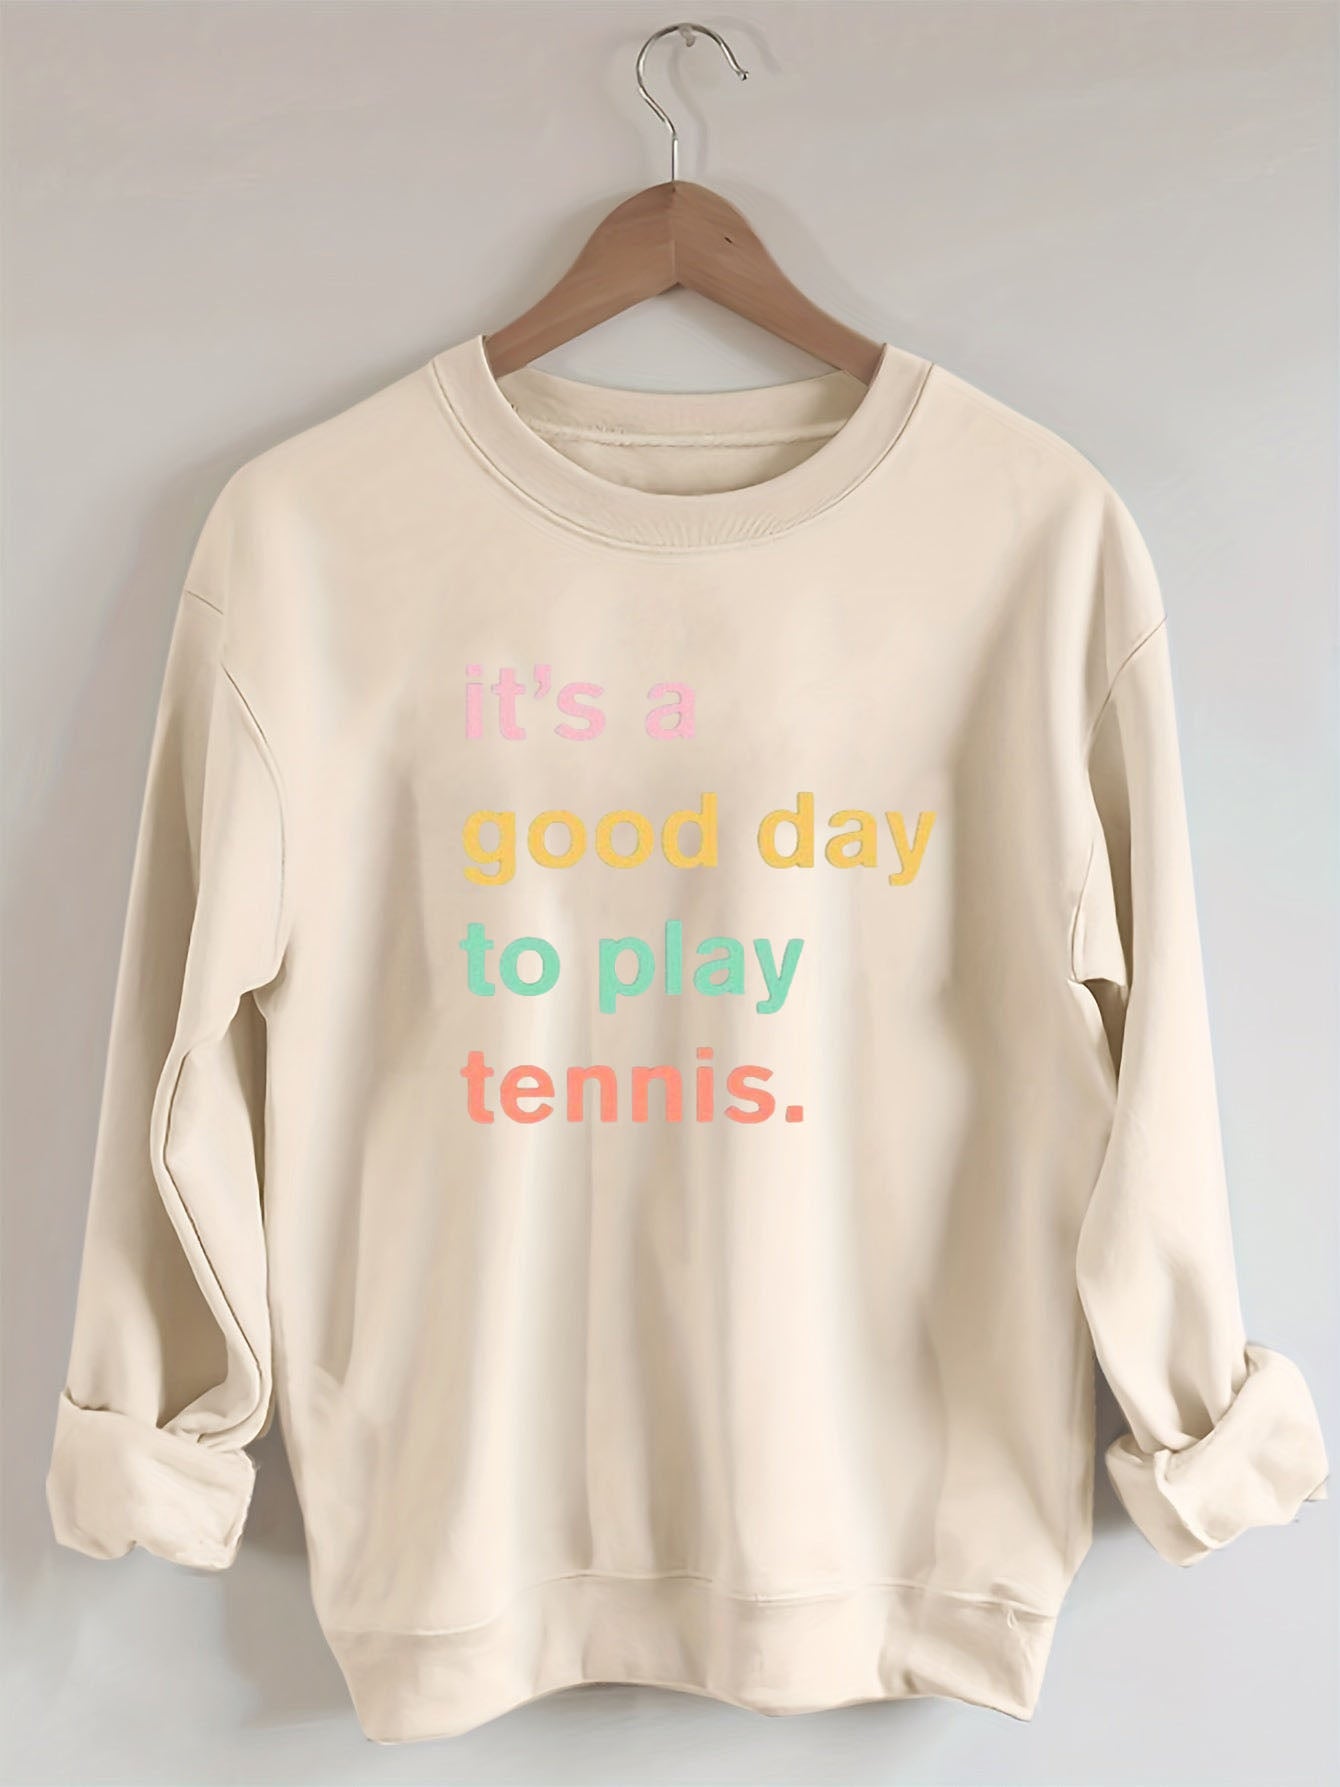 It's A Good Day To Play Tennis Sweatshirt